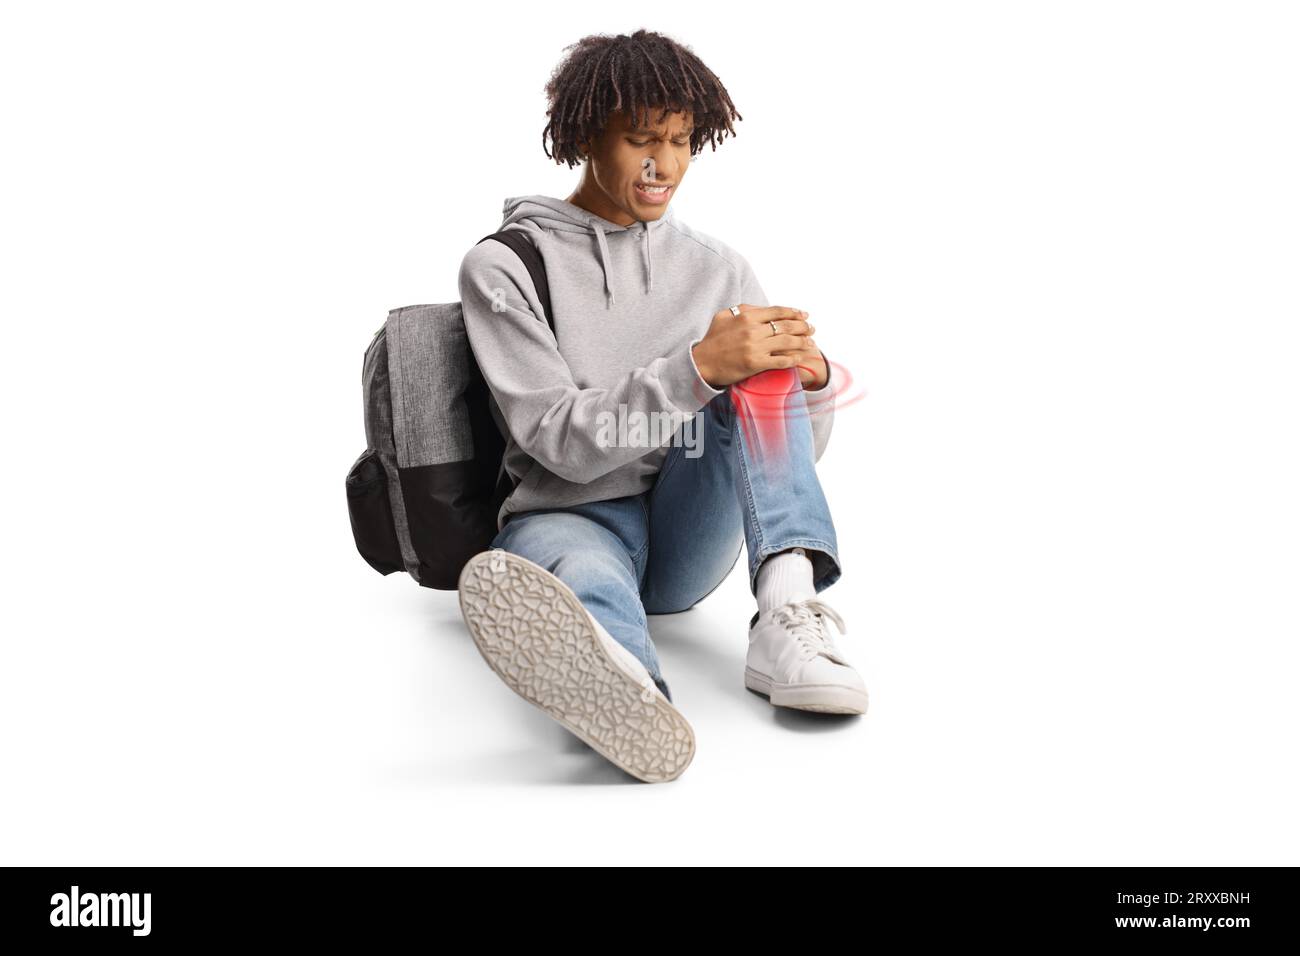 African american male student sitting on the floor and holding his injured knee marked with red isolated on white background Stock Photo